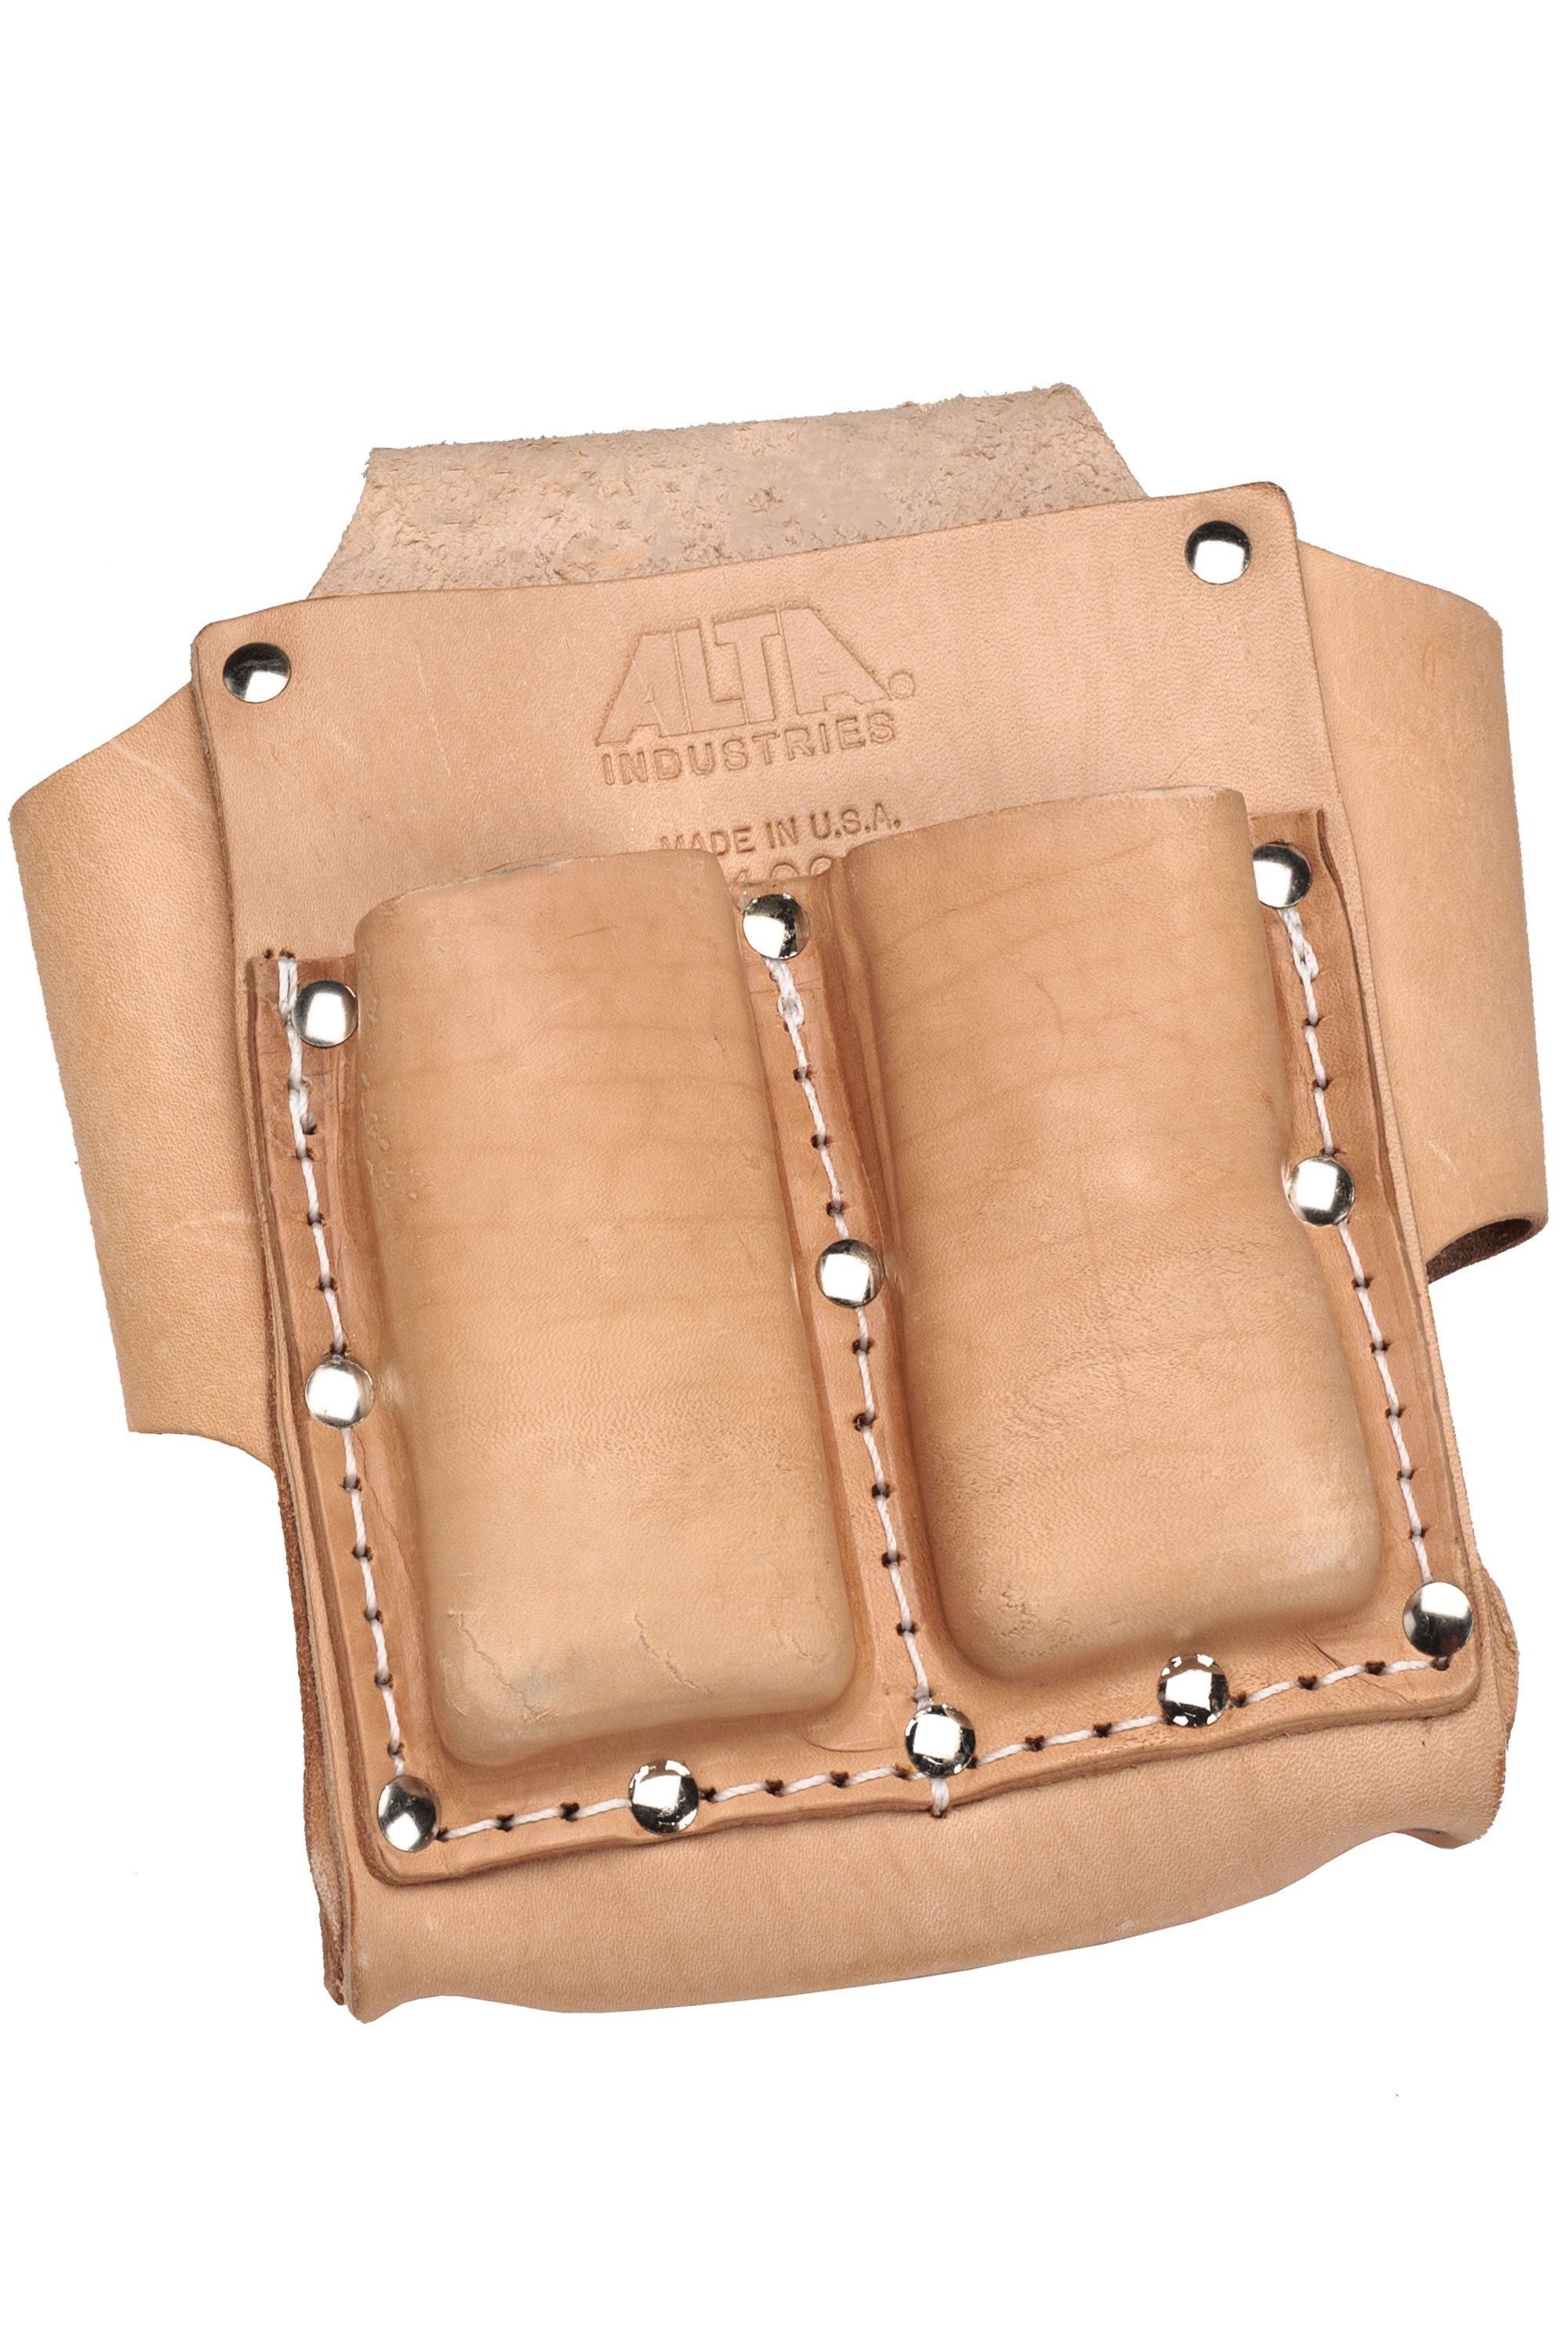 Alta Industries 84007 3 Pocket Style Tool Pouch